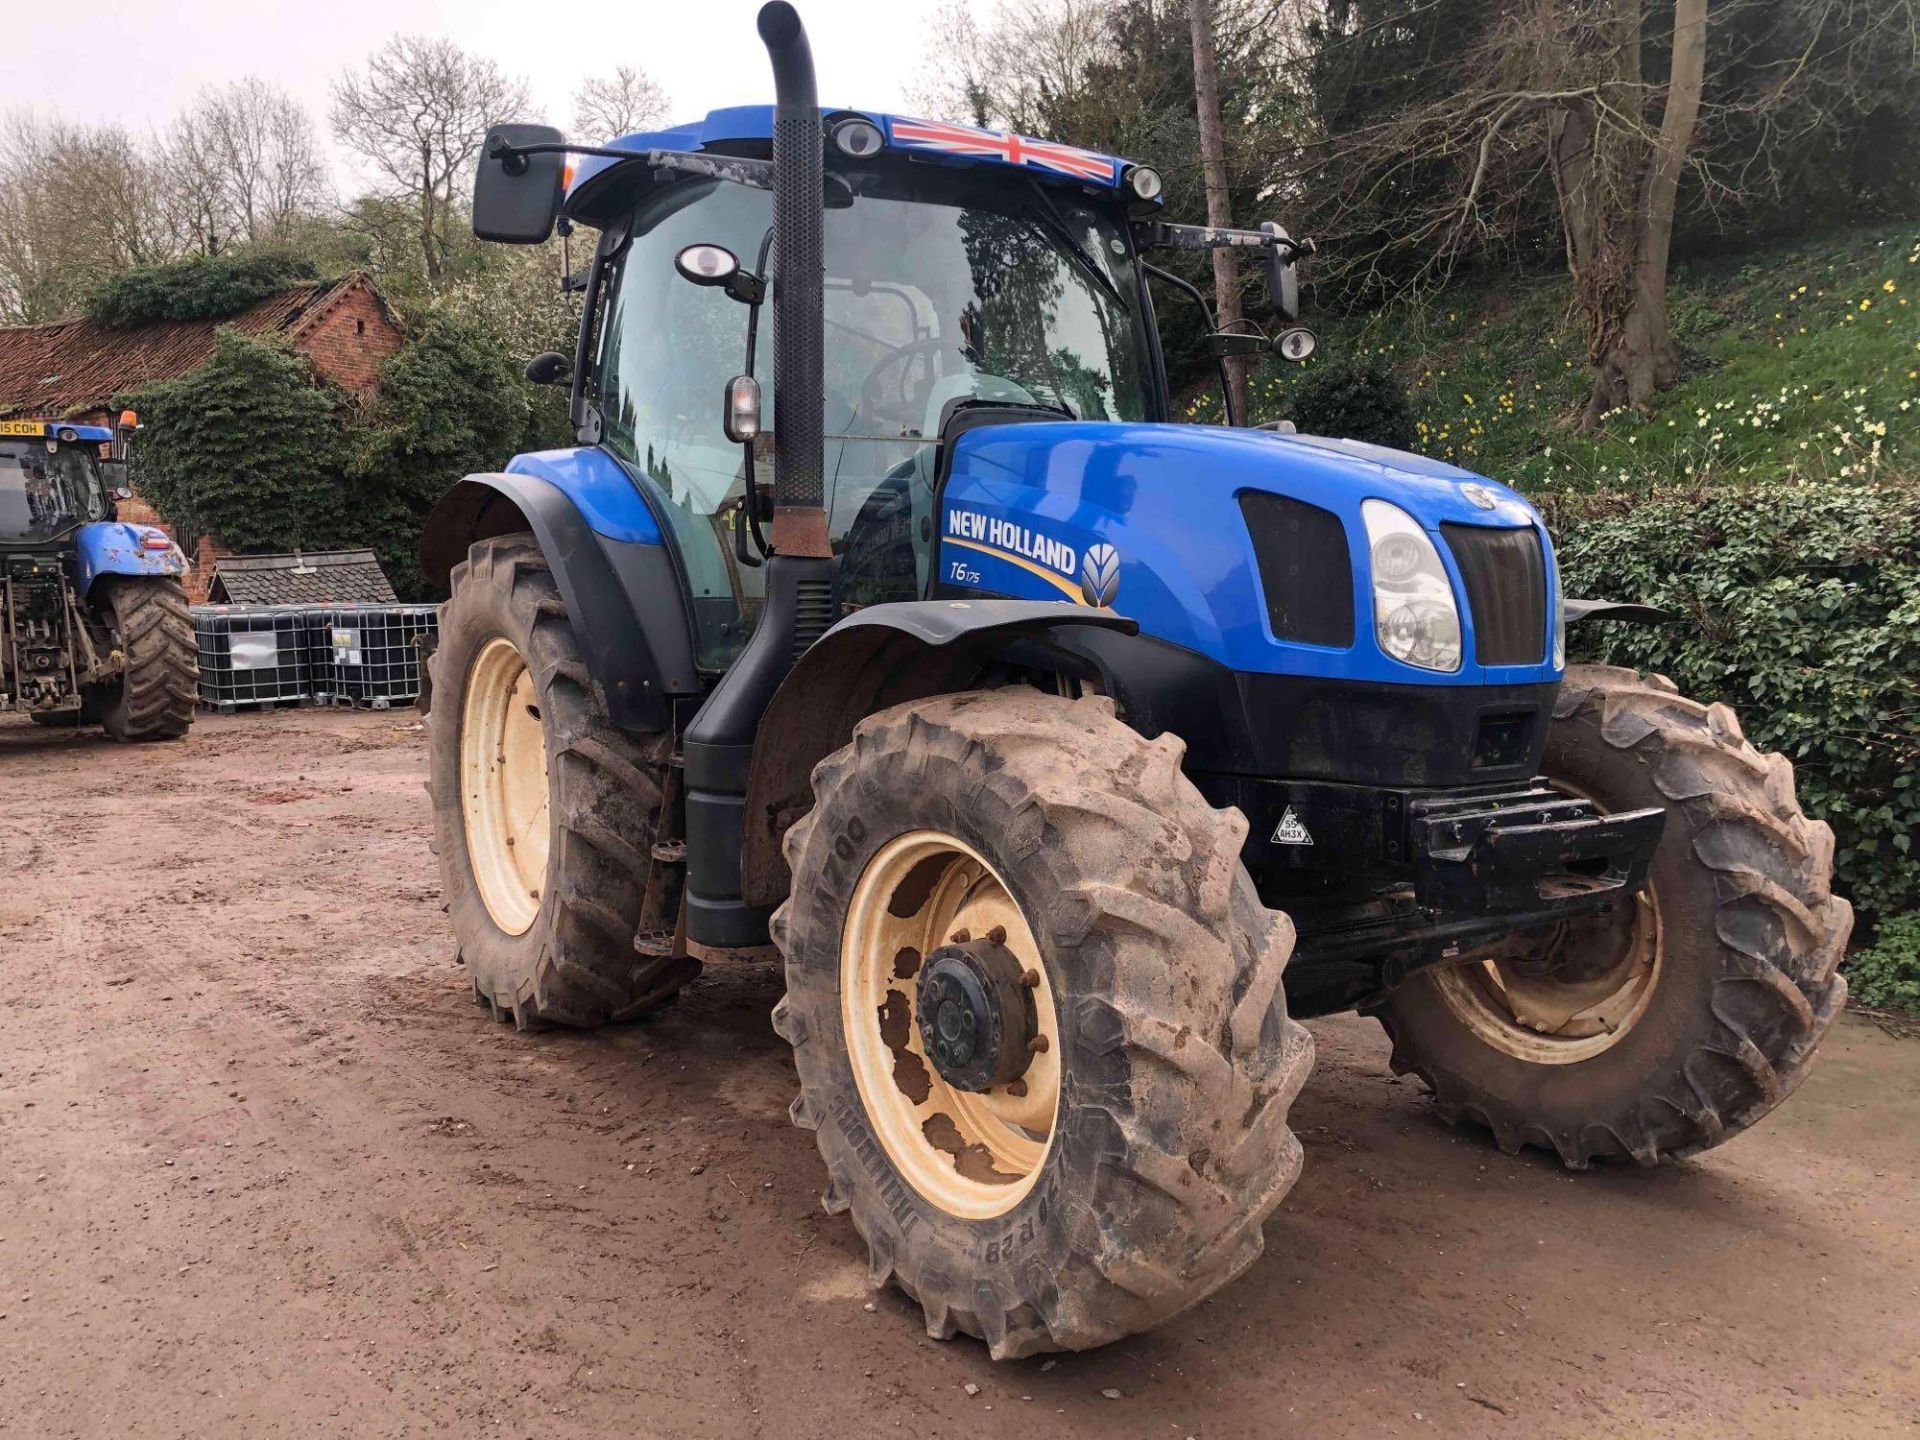 2013 New Holland T6.175 4wd tractor, 3 manual spools, air, on 420/70R28 front and 520/70R38 rear whe - Bild 15 aus 26